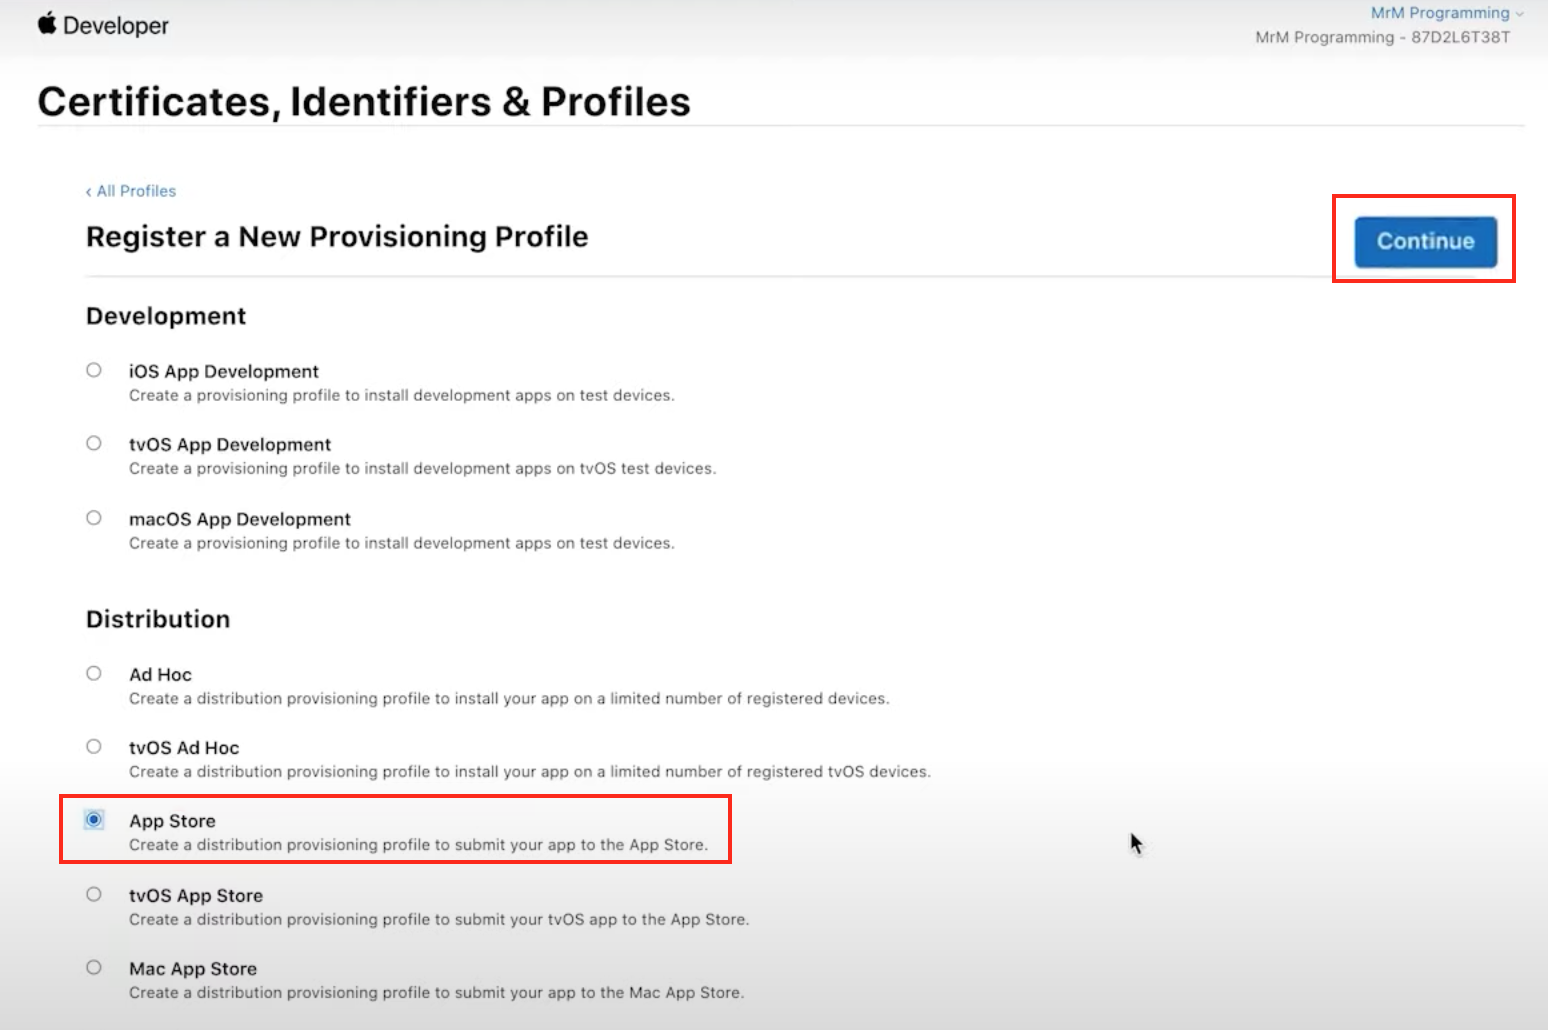 Register a New Provisioning Profile